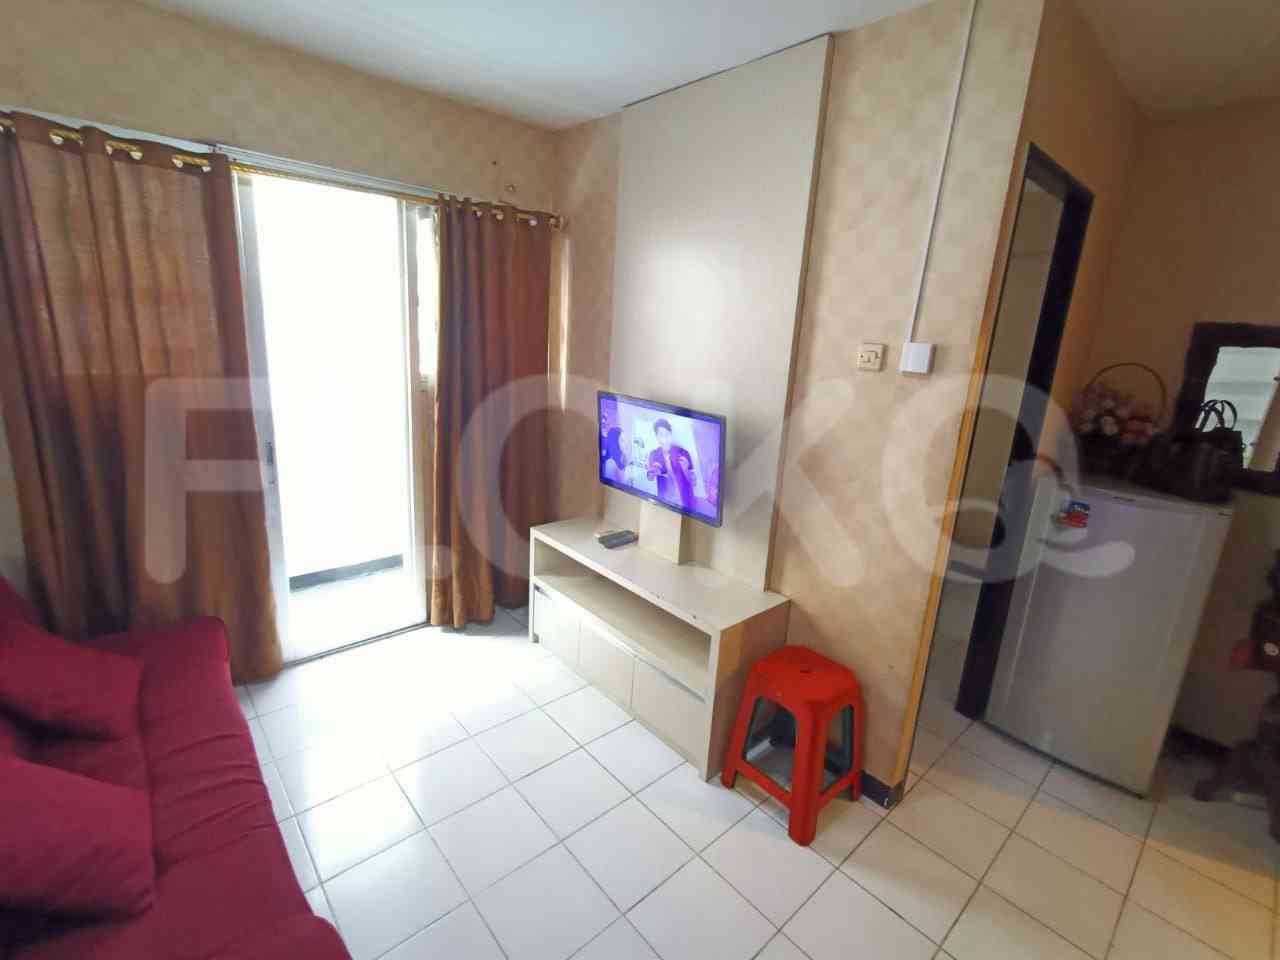 2 Bedroom on 15th Floor for Rent in Sentra Timur Residence - fca10f 2